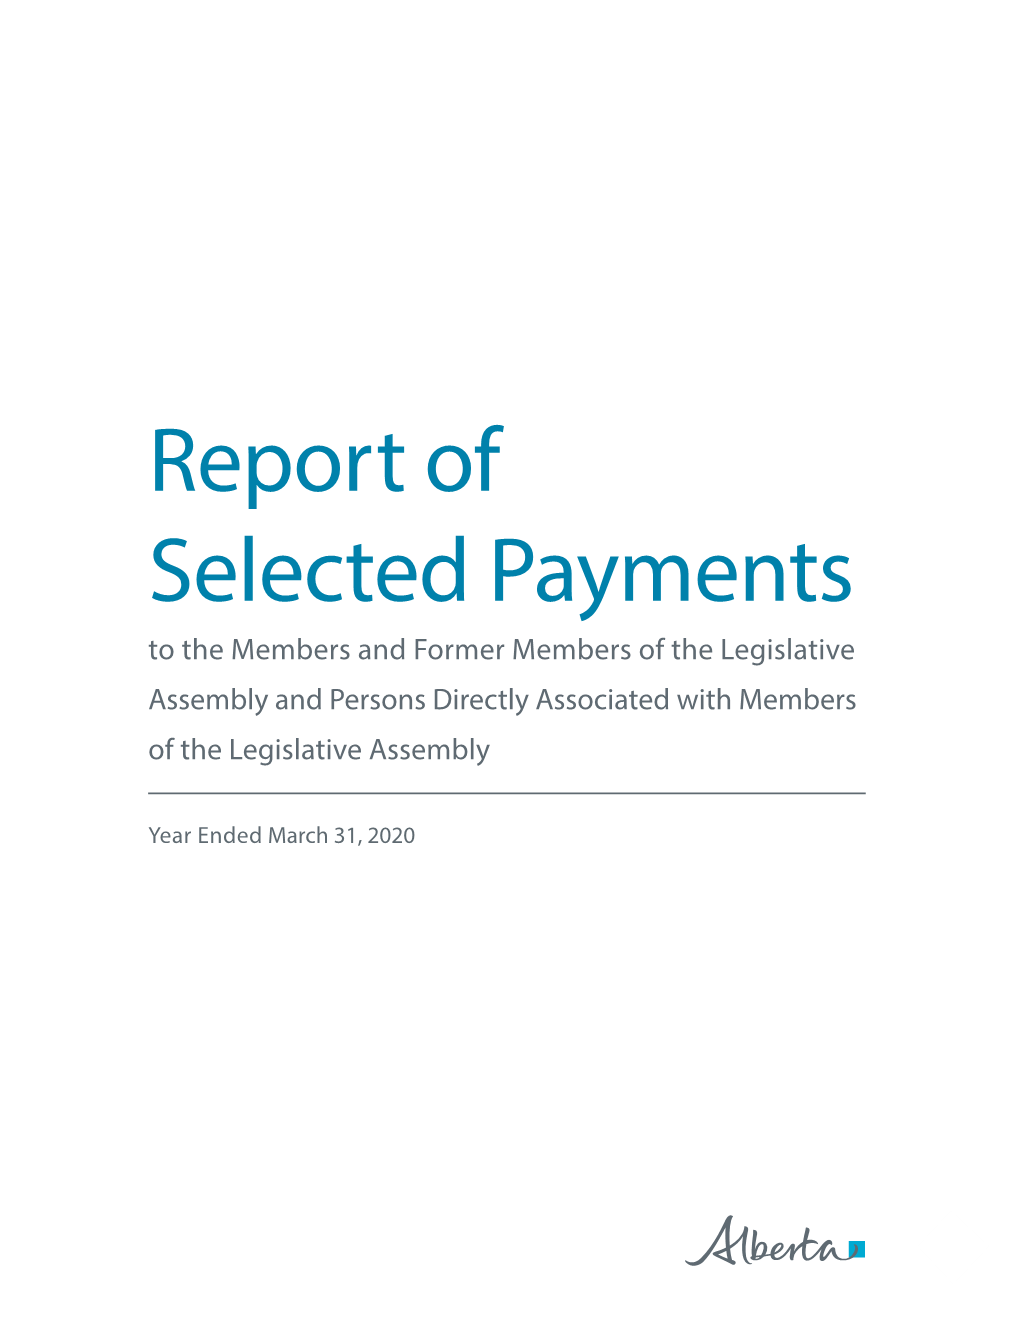 Report of Selected Payments to Mlas and Former Mlas